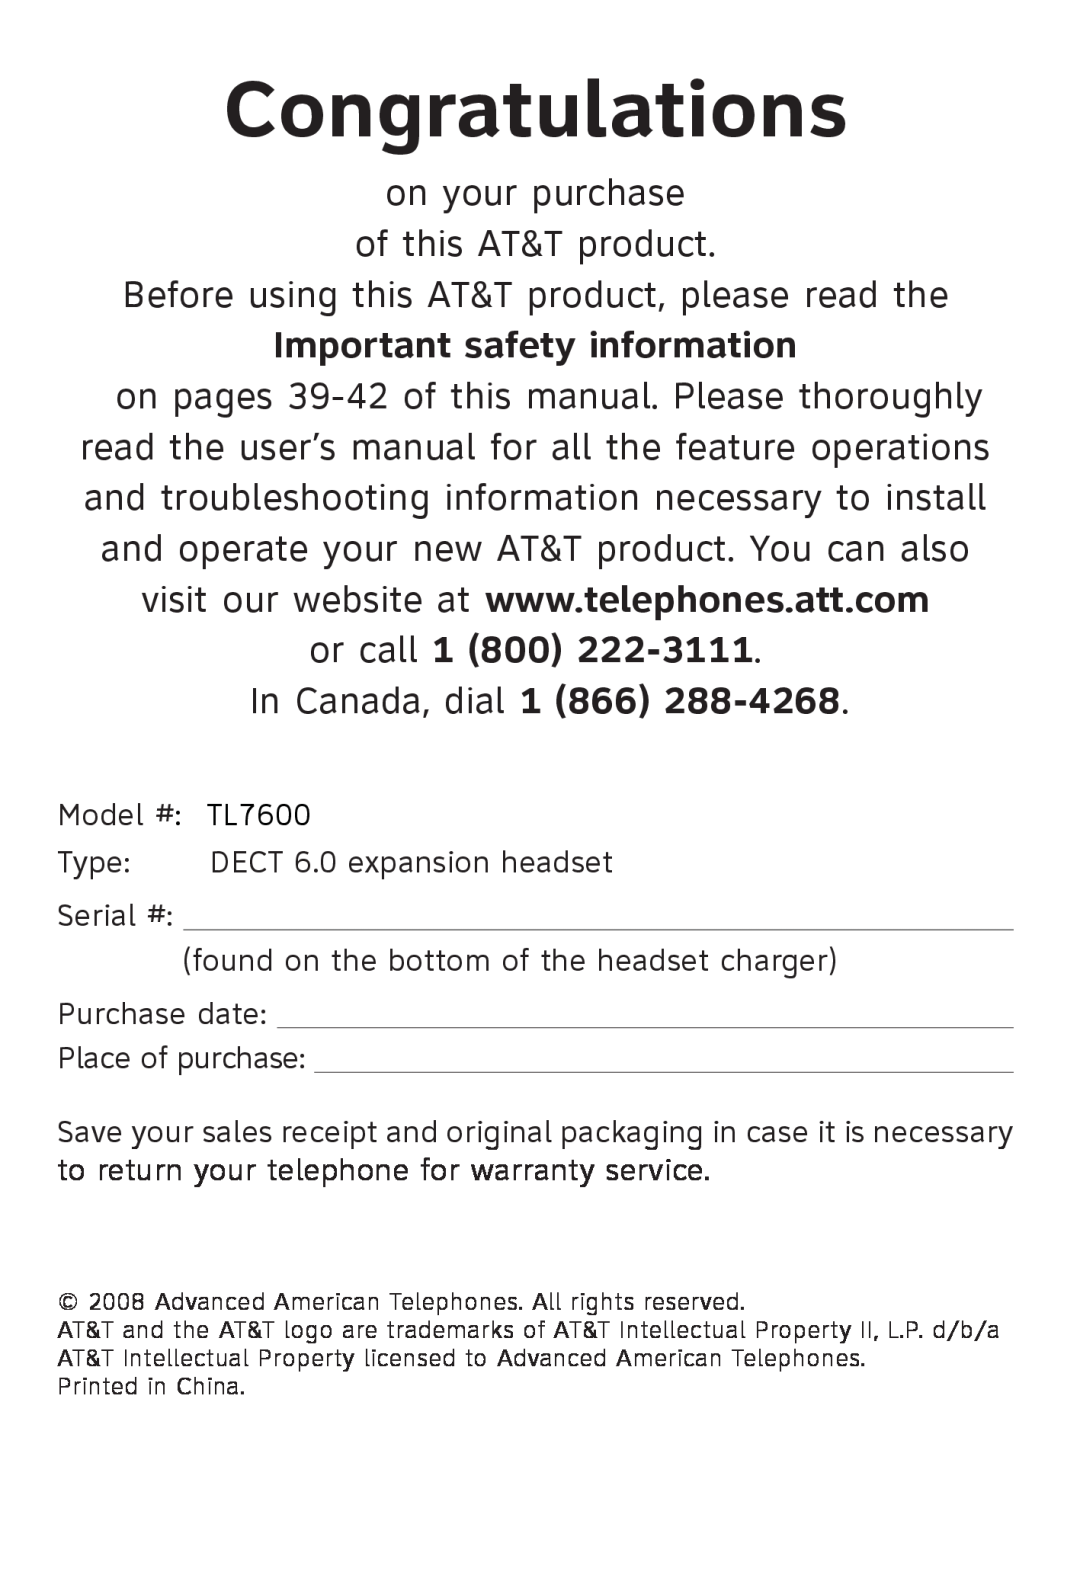 AT&T TL7600 user manual Congratulations, Important safety information, or call 